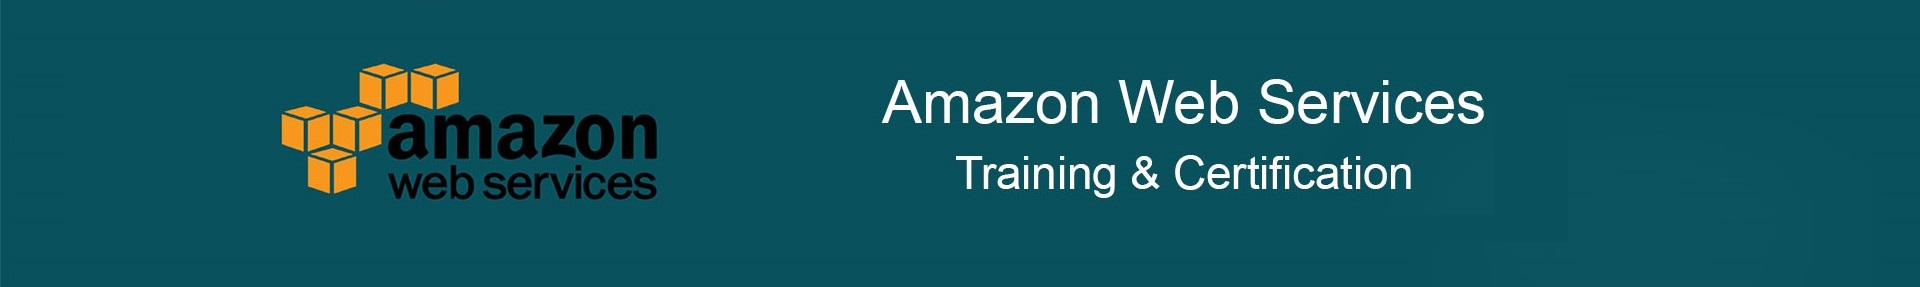 AWS Boot Camp, AWS Certification, AWS Training, Amazon Web Service Boot Camp, AWS Sysops Administrator Boot Camp, Amazon Boot Camp, Amazon Certification, Amazon Training, Amazon Web Service Boot Camp, Amazon Sysops Administrator Boot Camp, Amazon cloud training, Amazon cloud certification, Amazon cloud service training, Amazon cloud security, Amazon cloud boot camps